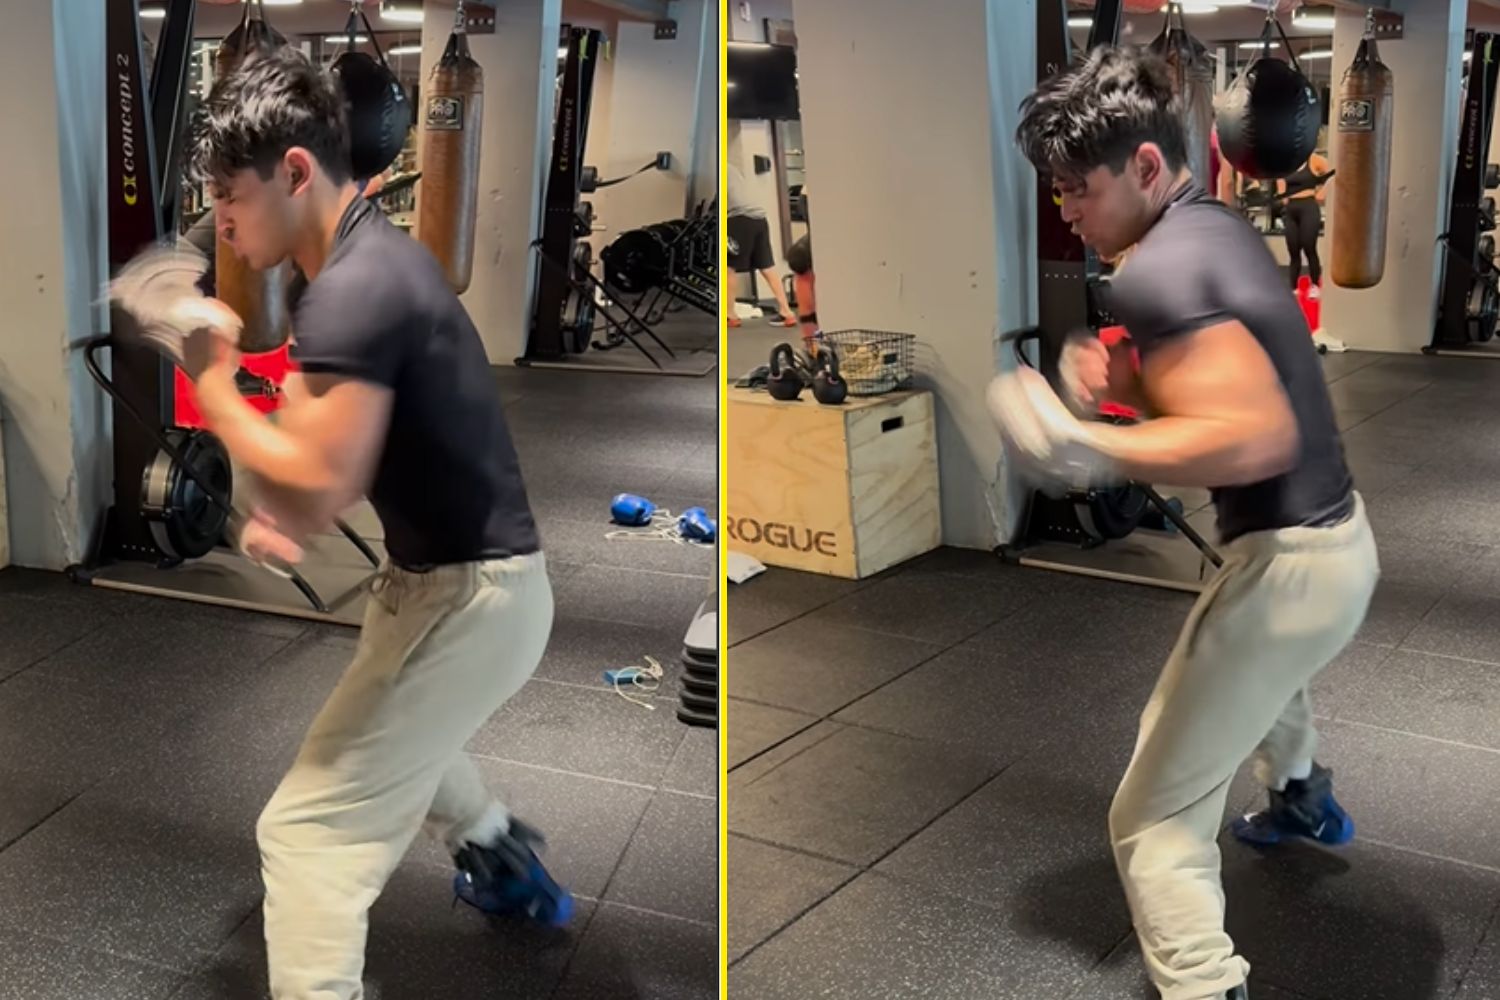 ‘Fastest puncher in boxing’ – Ryan Garcia amazes fans with blistering hand speed as he returns to gym days after Devin Haney win [Video]